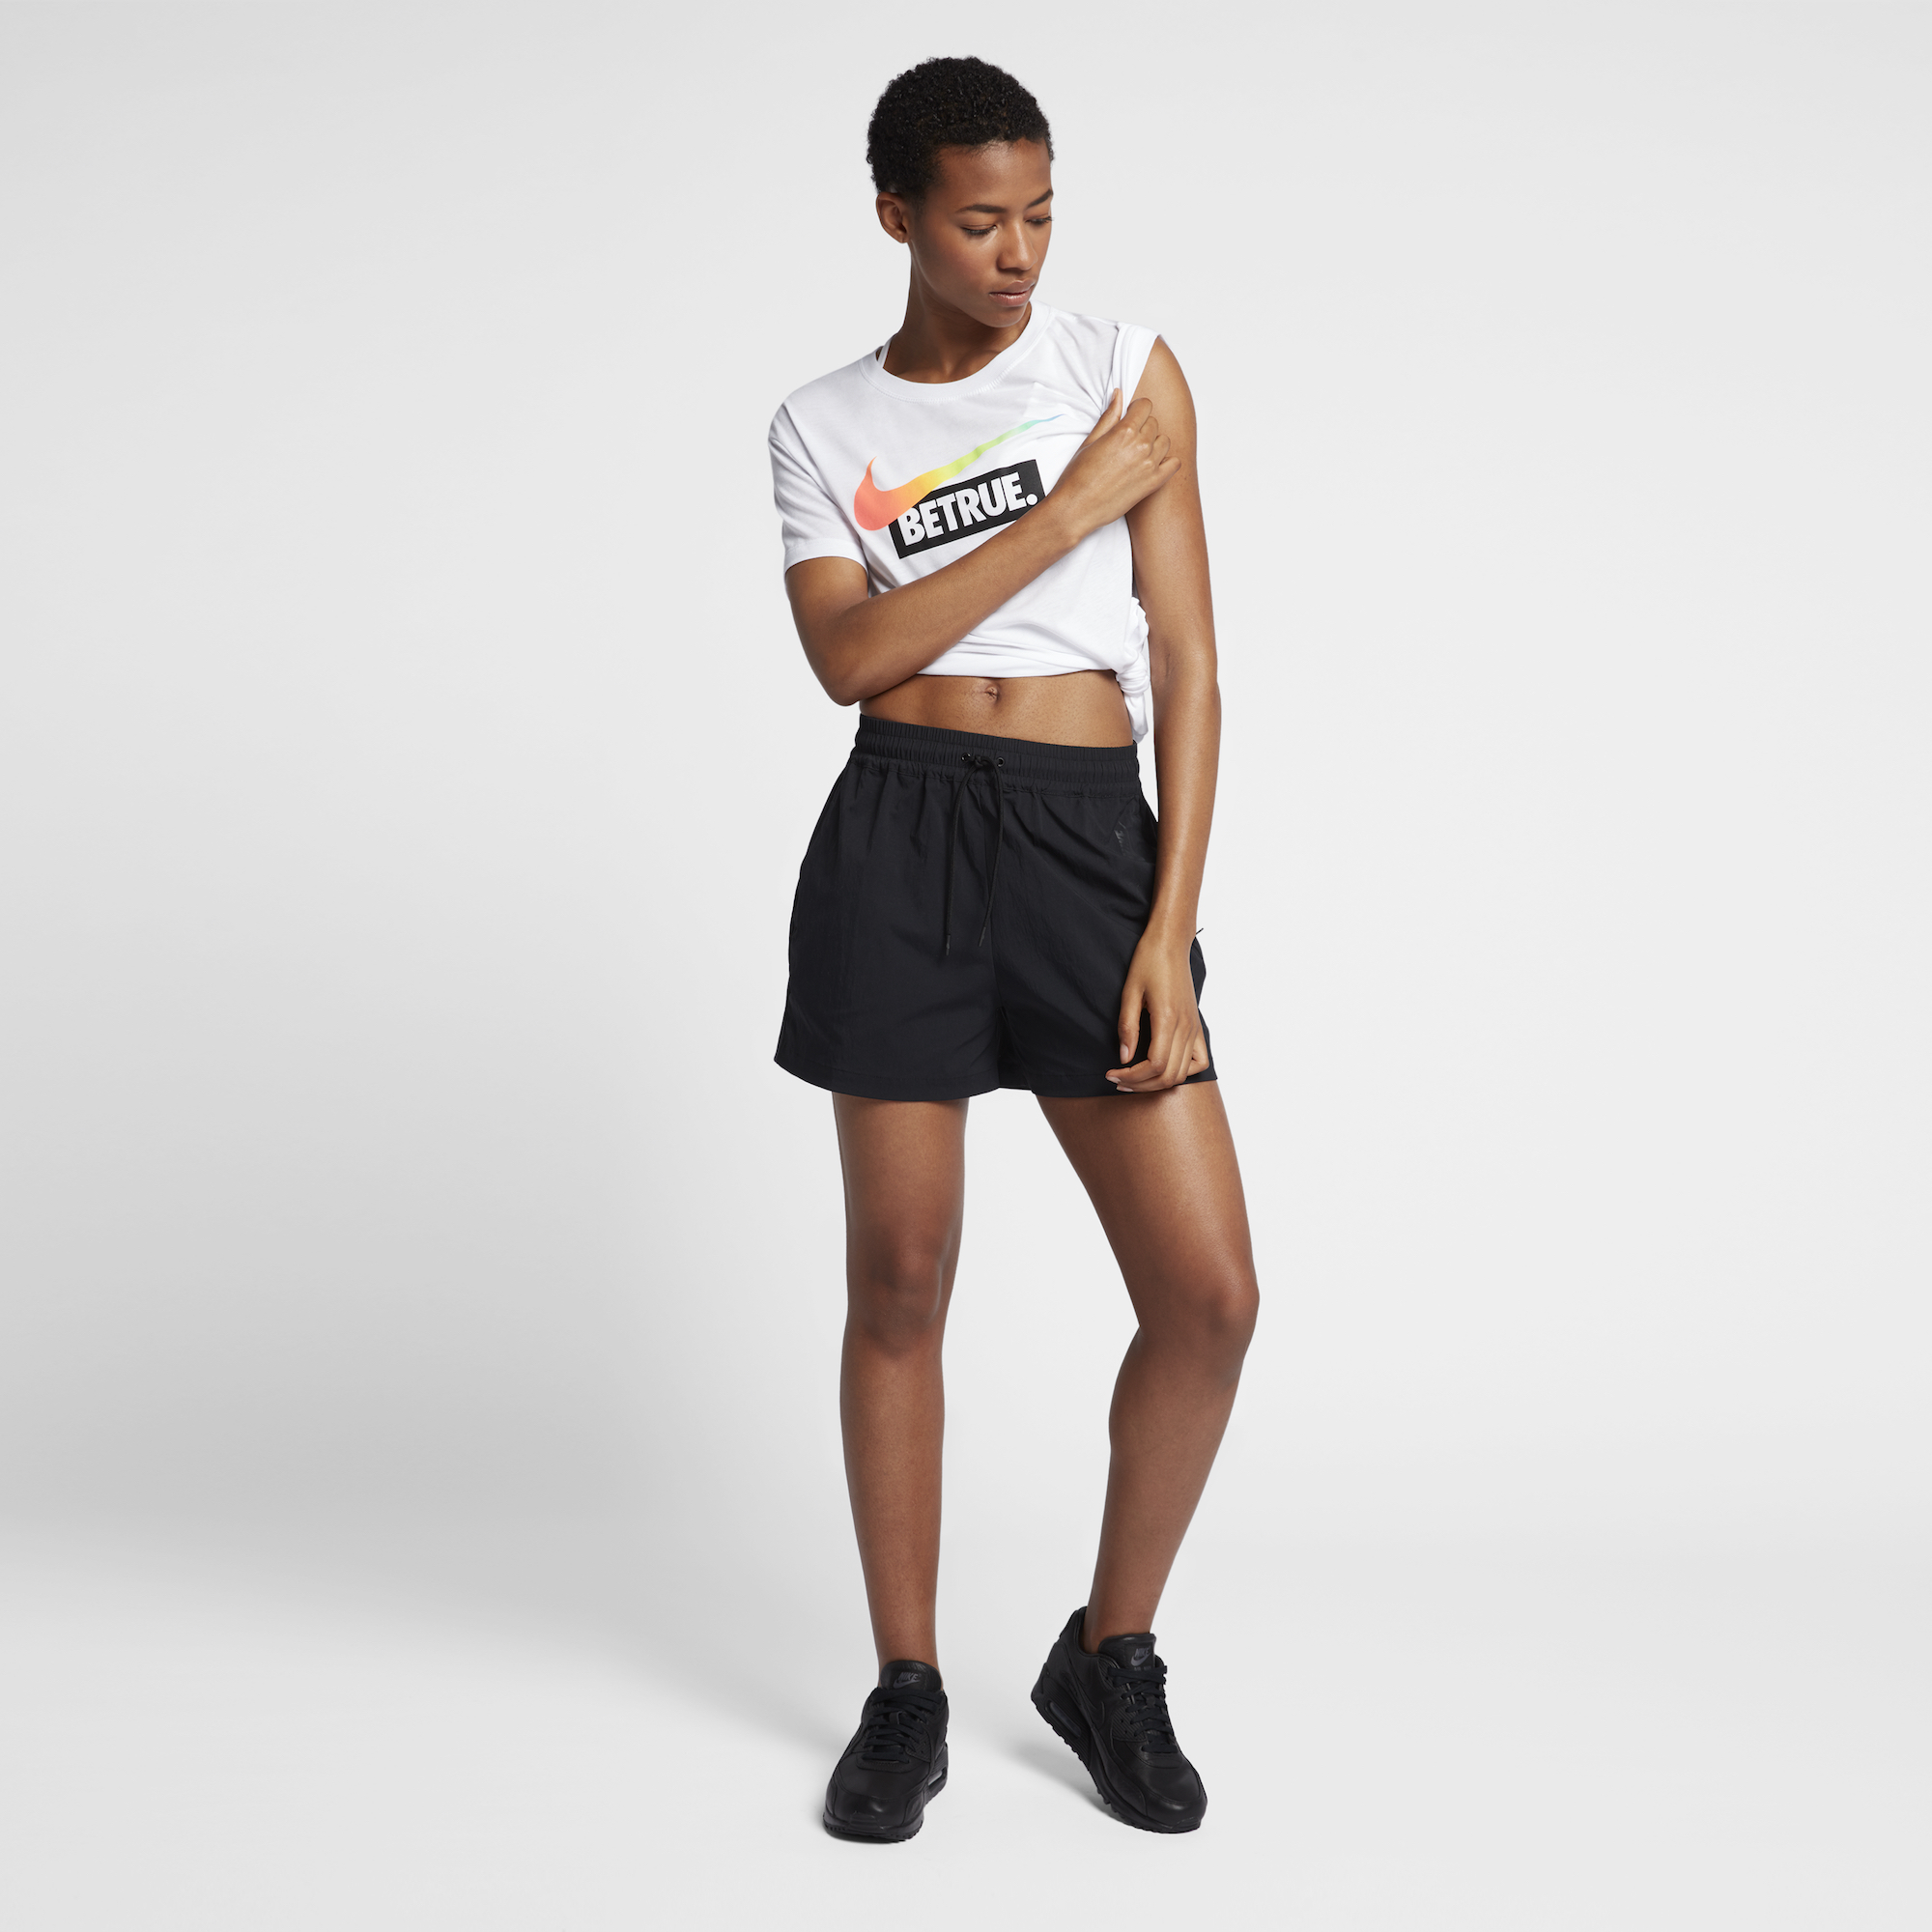 nike BETRUE 2017 collection t-shirt 2